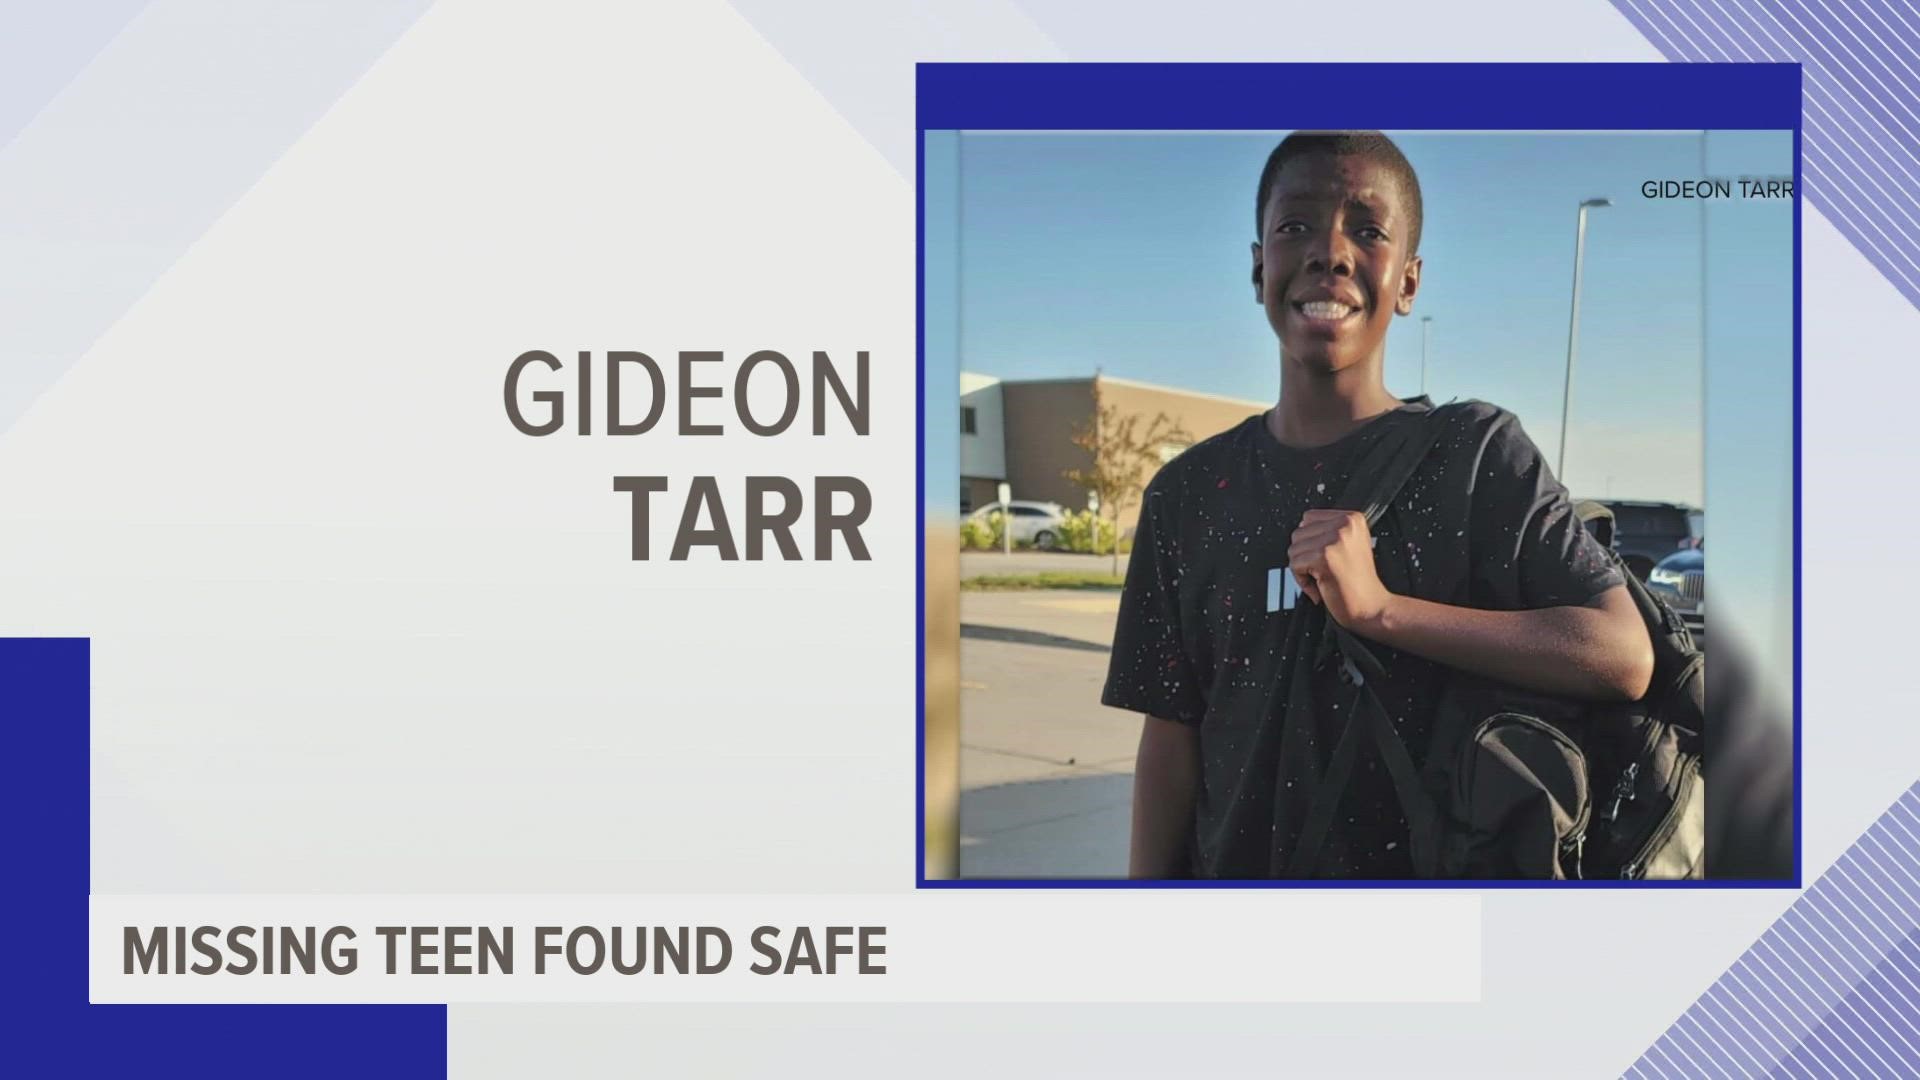 The Waukee Police Department says 13-year-old Gideon Tarr has been found and is safe.